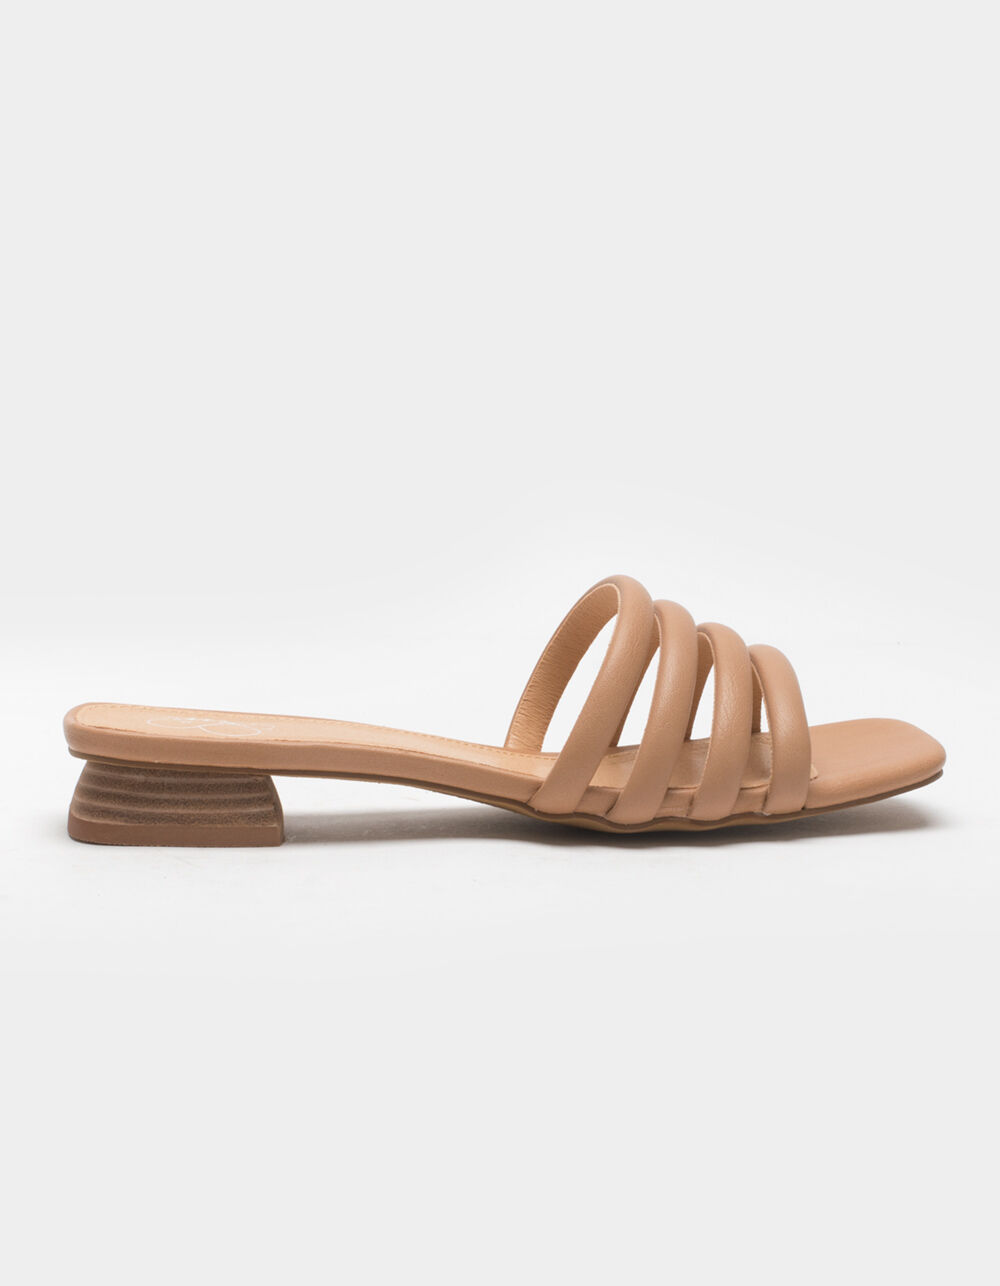 OASIS SOCIETY Strappy Womens Block Heels - NUDE | Tillys